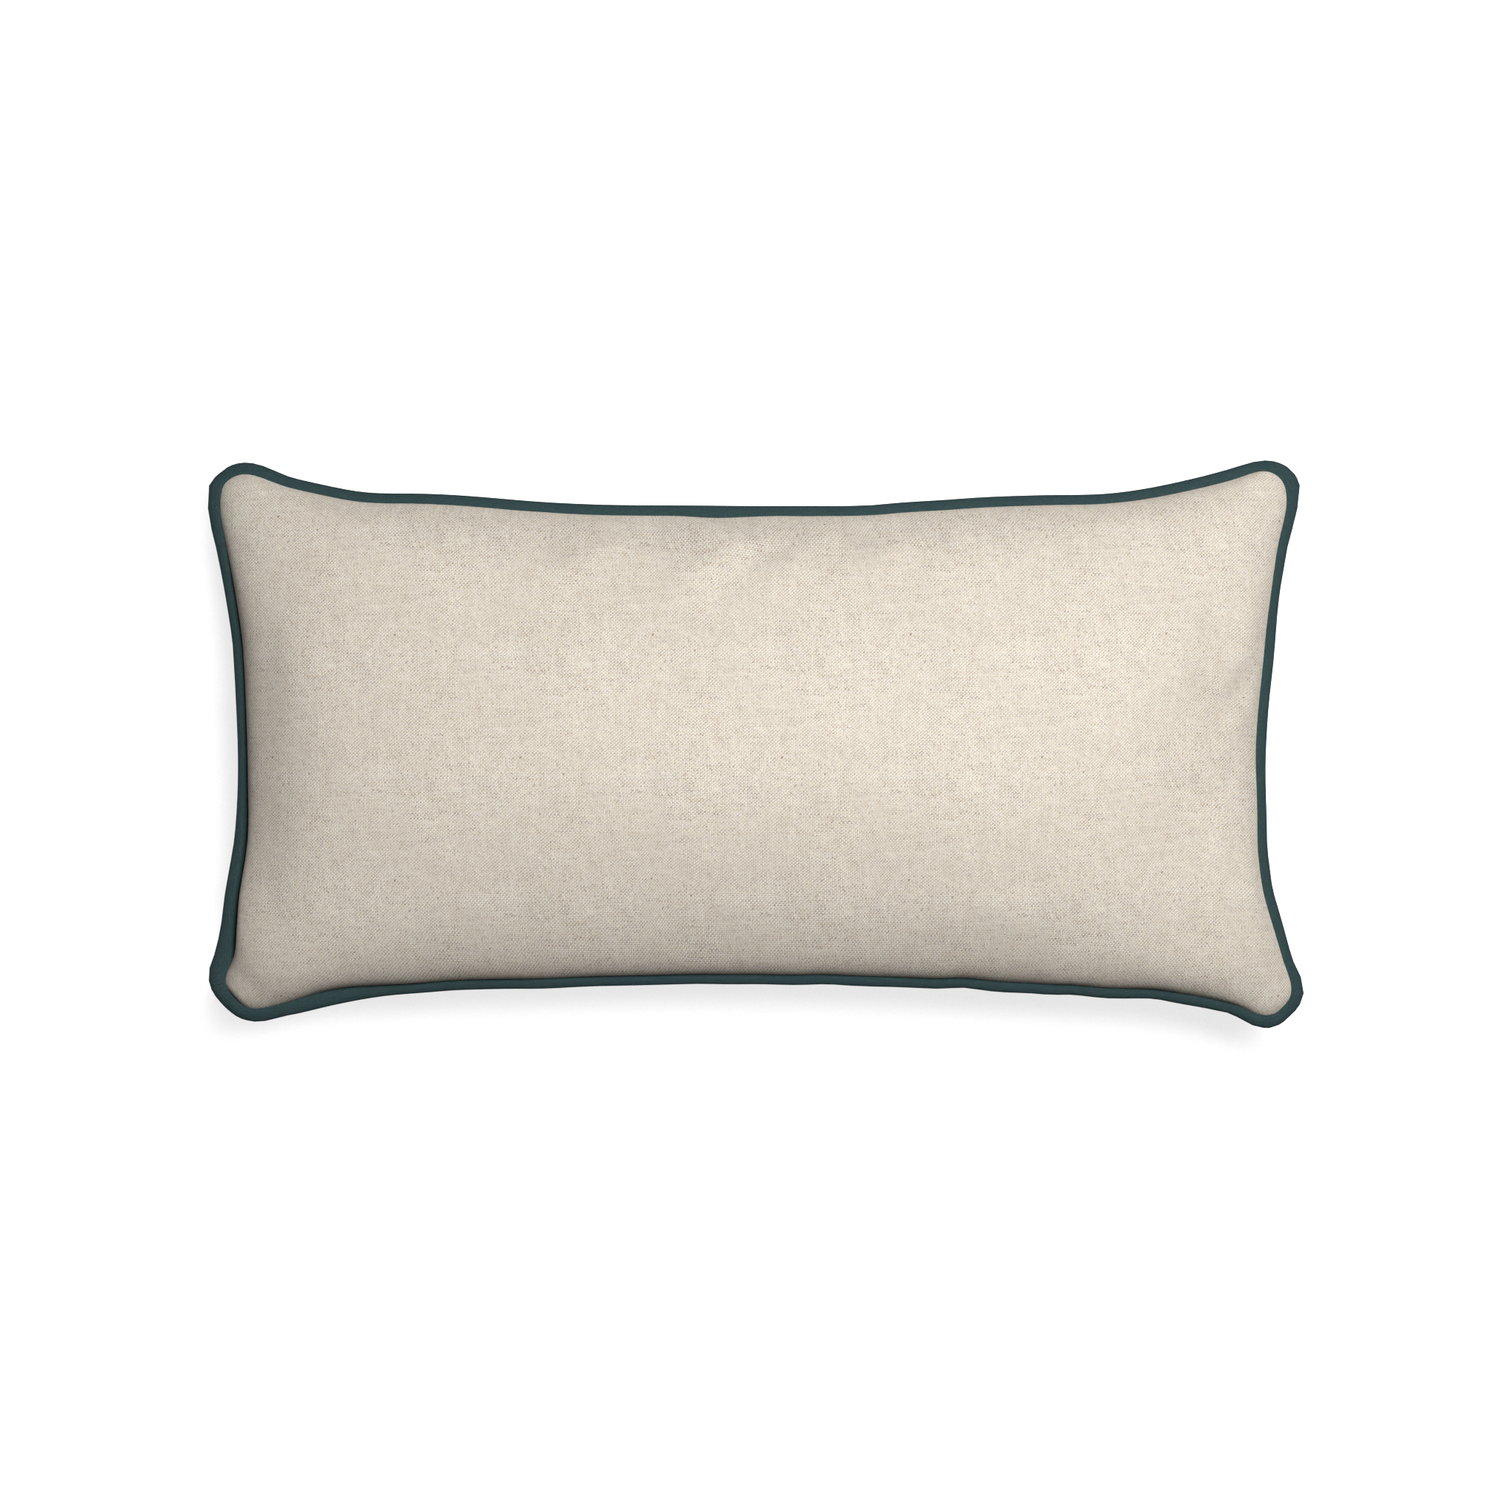 Midi-lumbar oat custom light brownpillow with p piping on white background